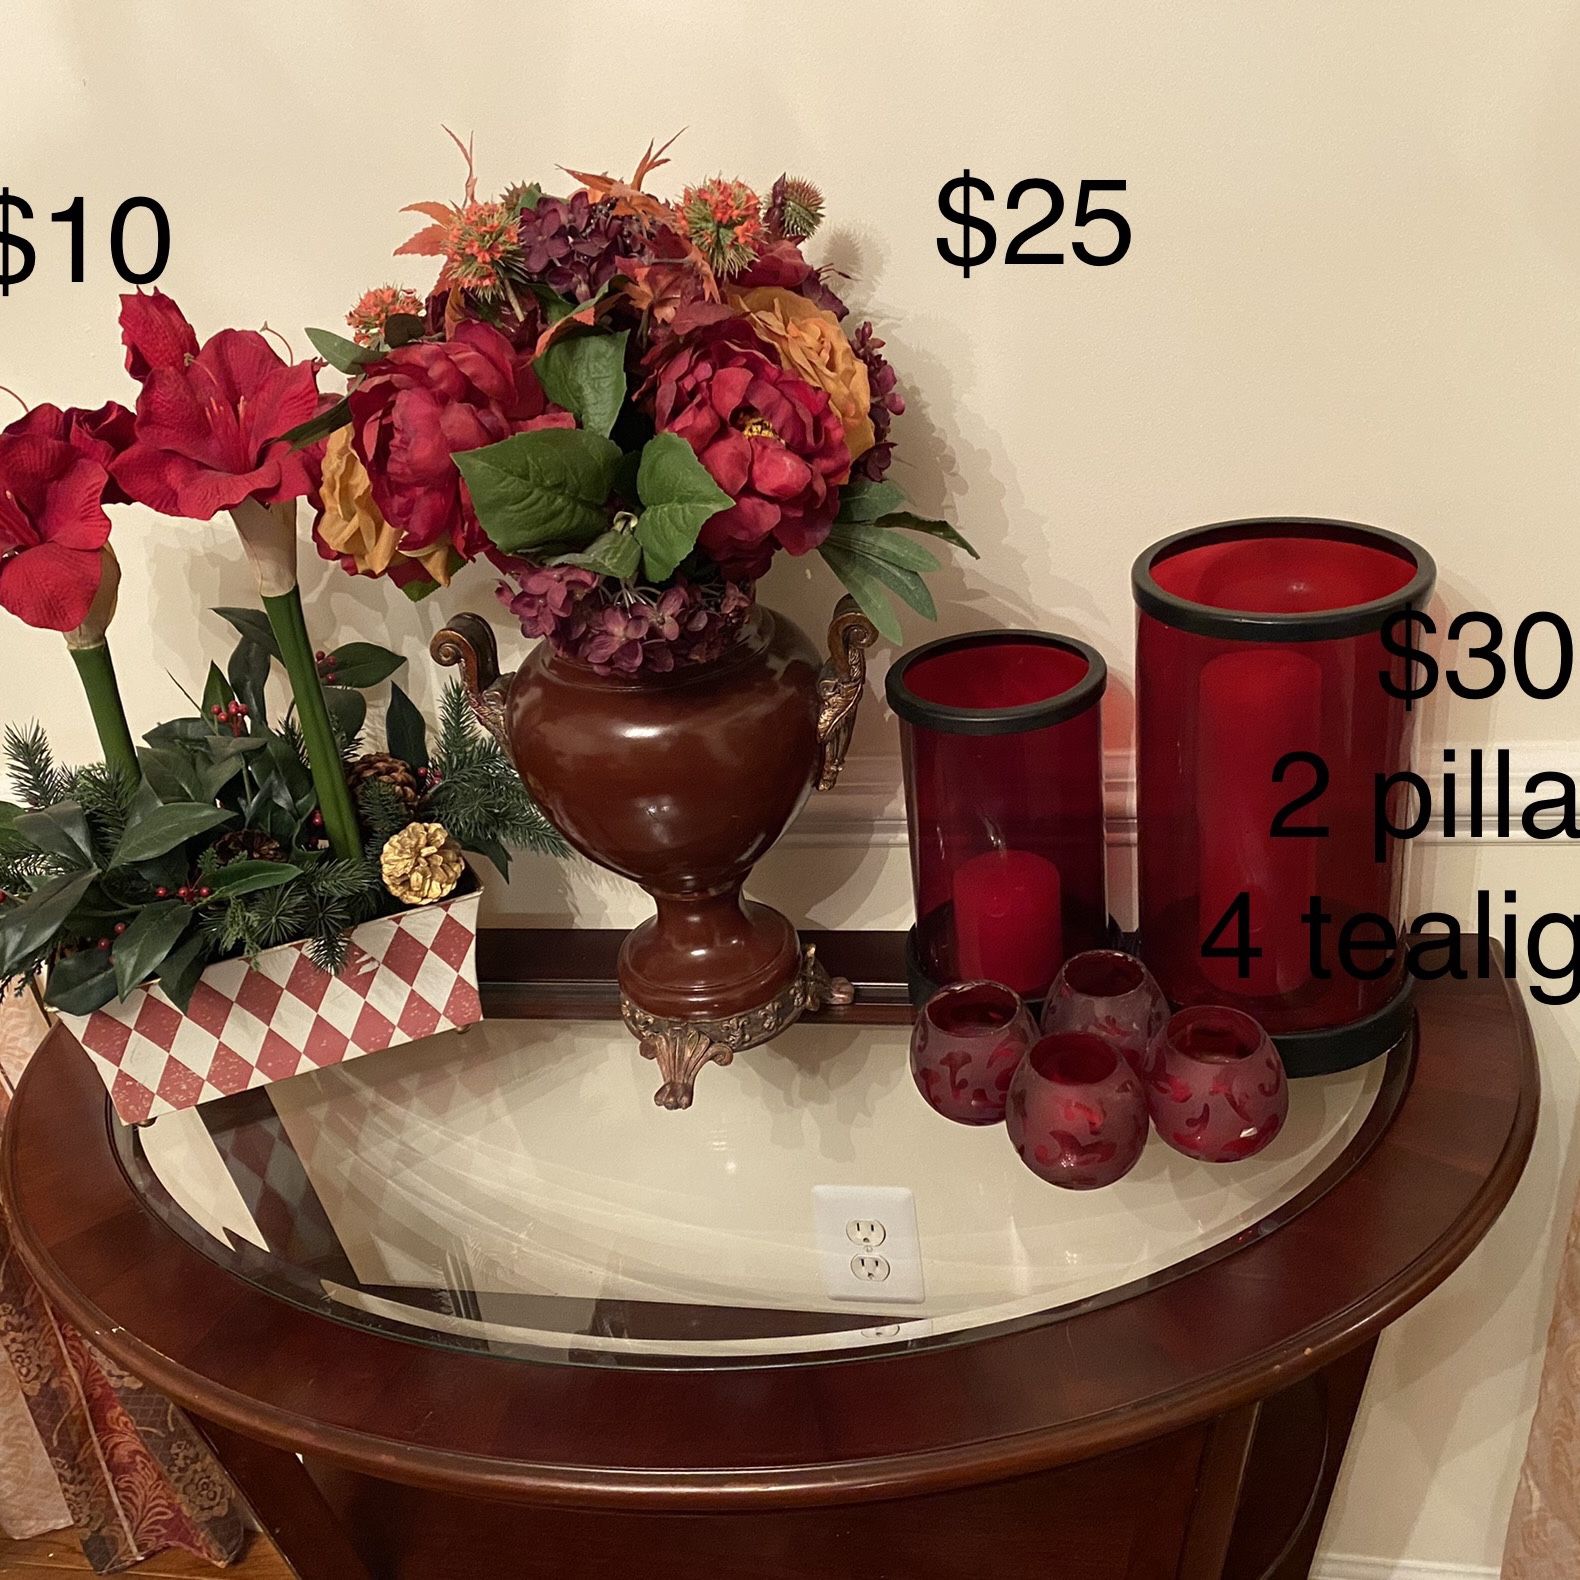 Marked Down! See Price Drop In Description. Coordinating Decor Centerpieces and Candle Holders